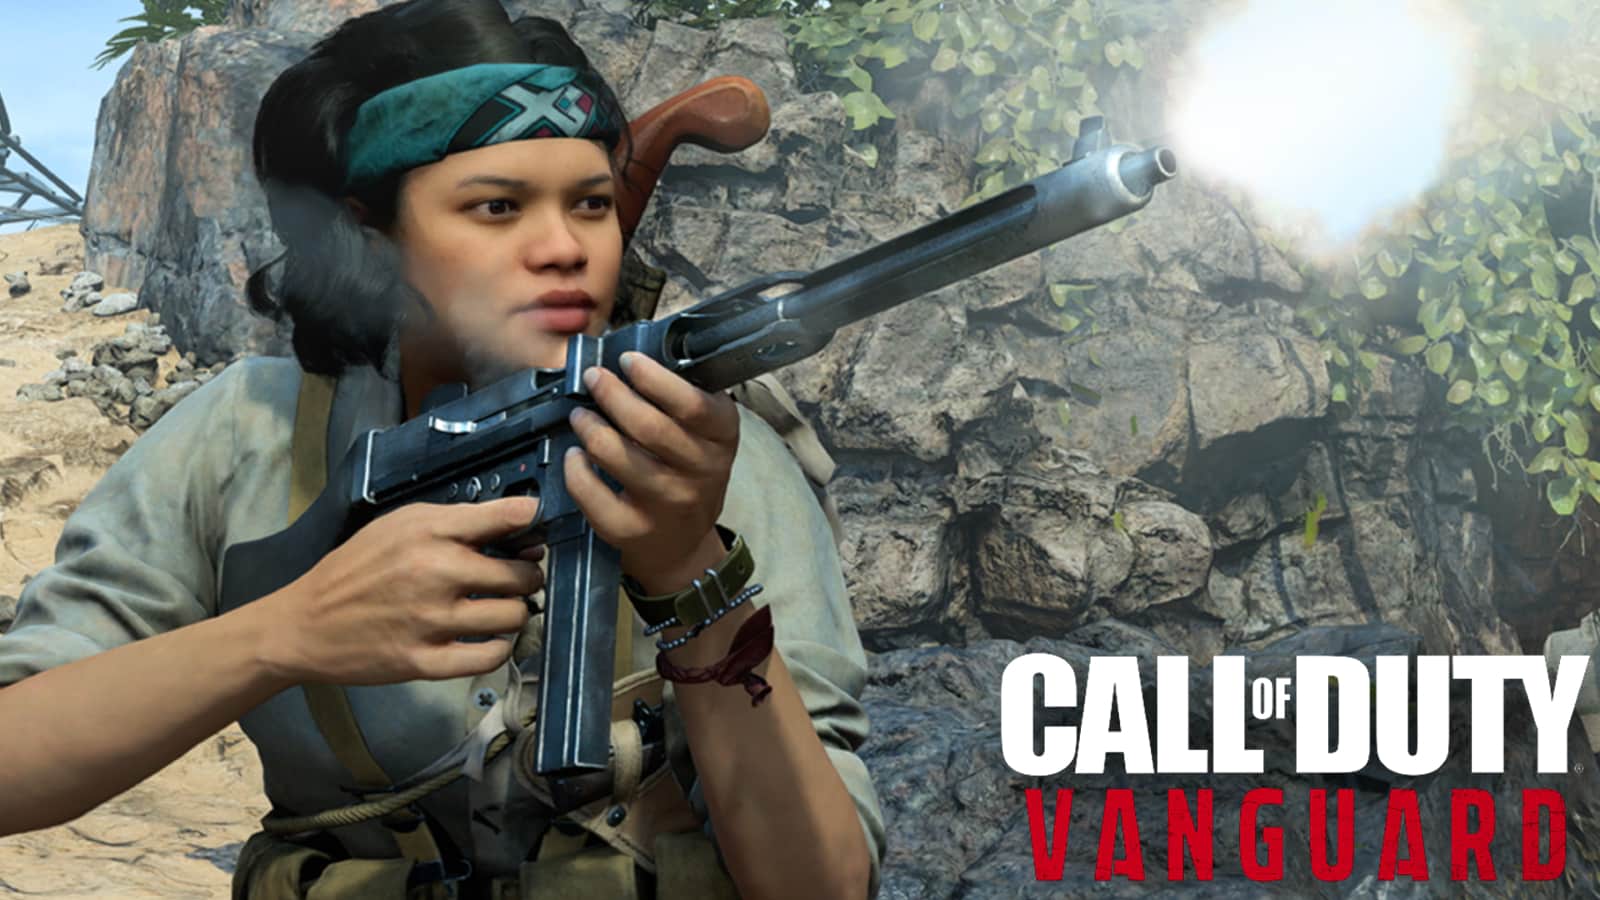 Woman firing weapon in Call of Duty Vanguard Ranked Play